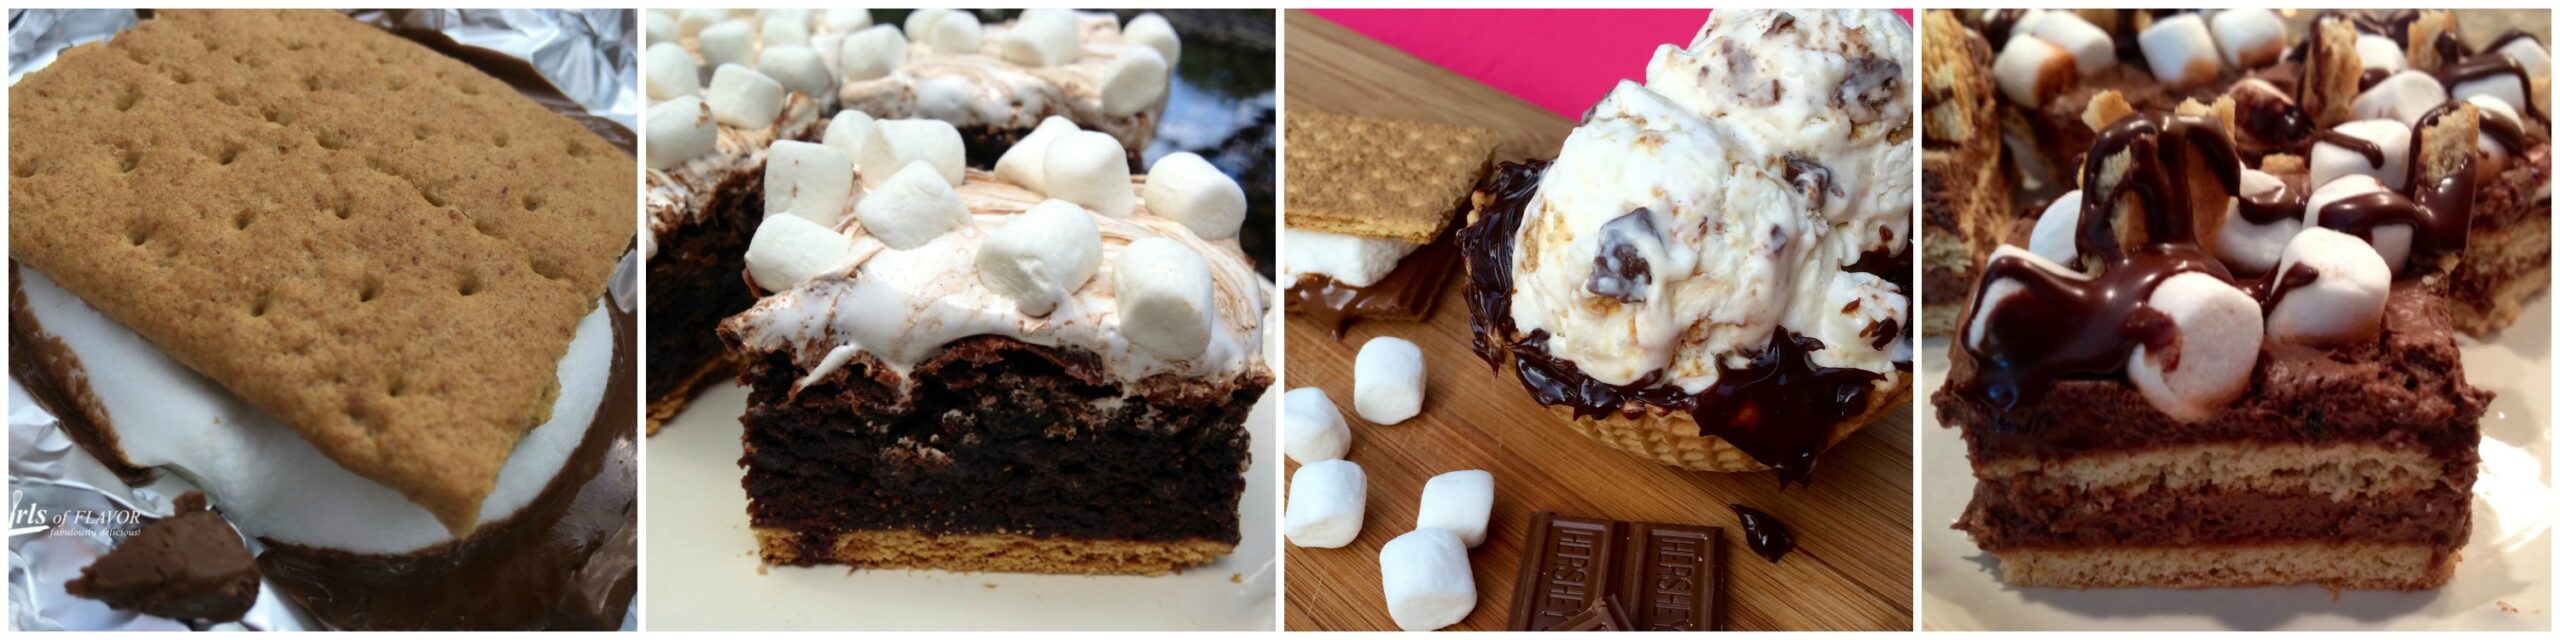 Left to right: Grilled Smores; Smores brownies; Smores ice cream; Smores pudding bars